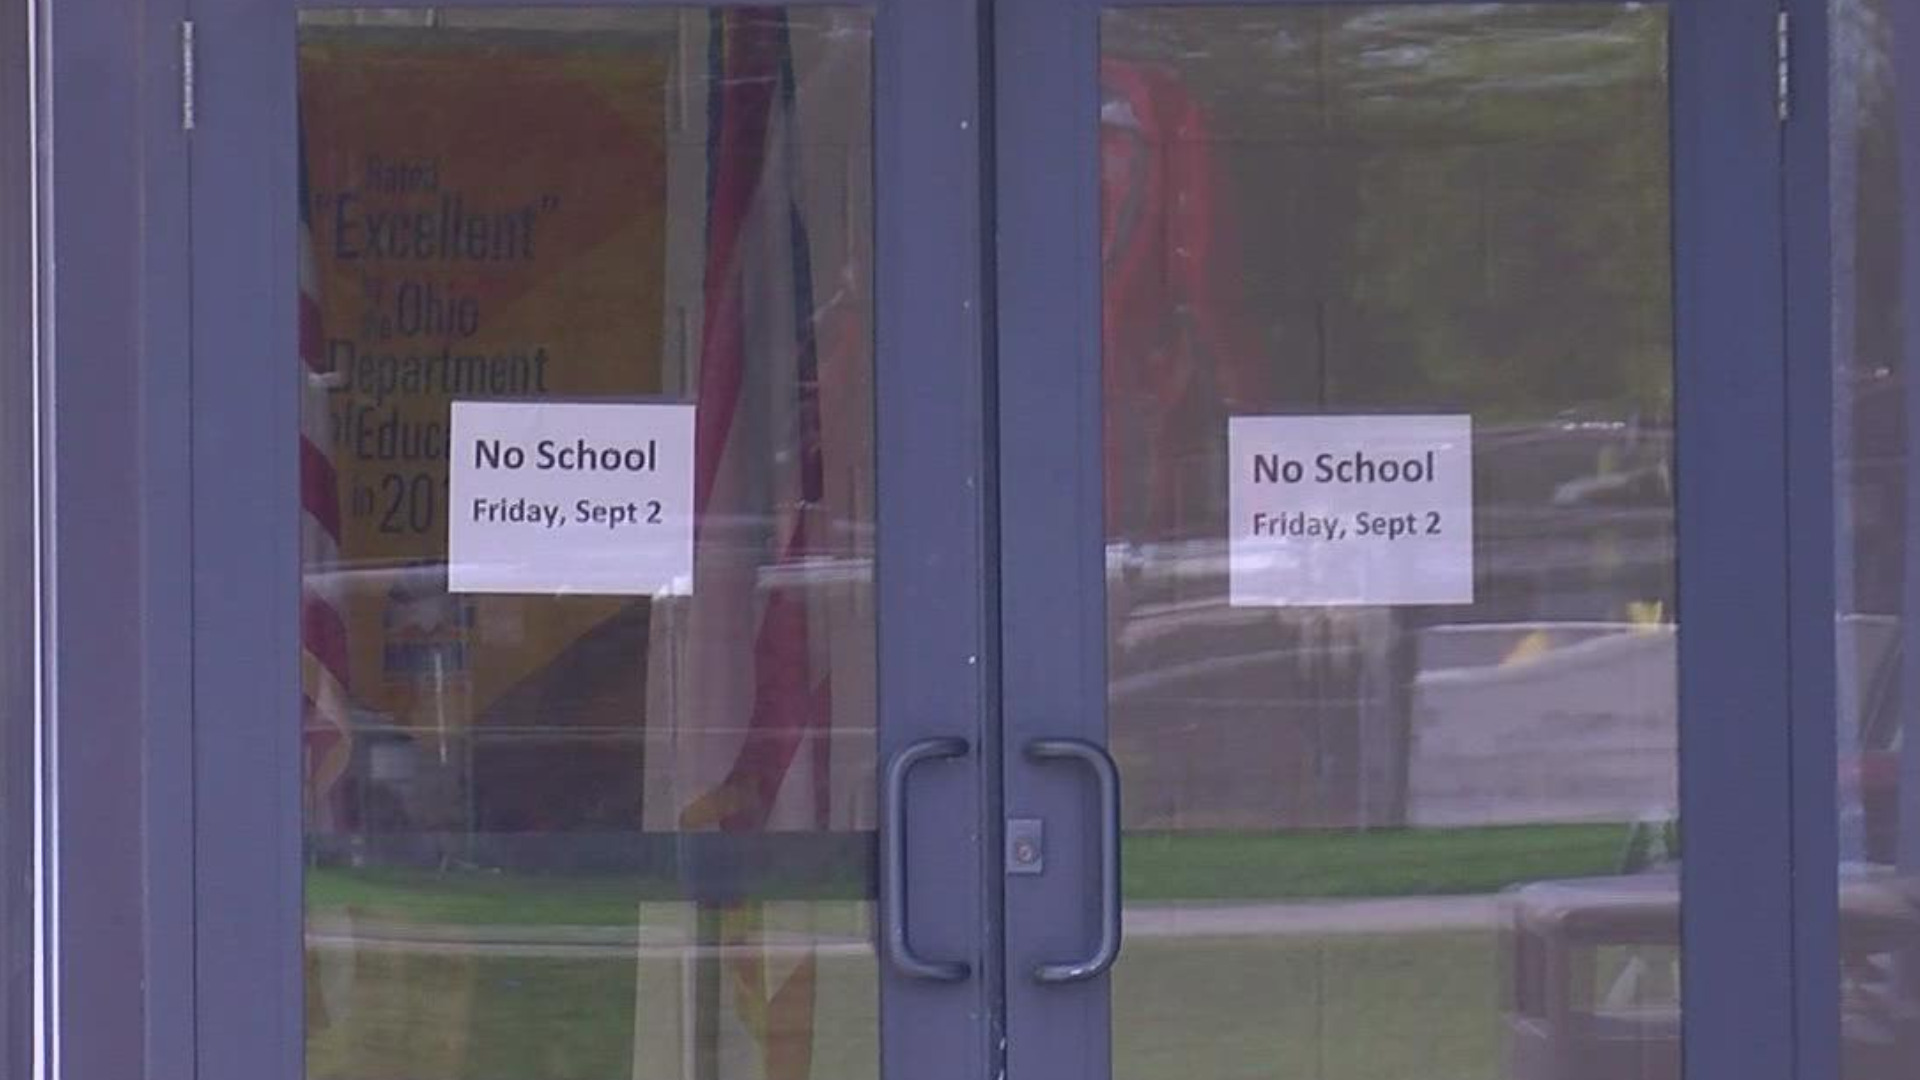 With five teachers out sick and no replacements, school representatives said they "thought it best to use a calamity day" than double up on classrooms.